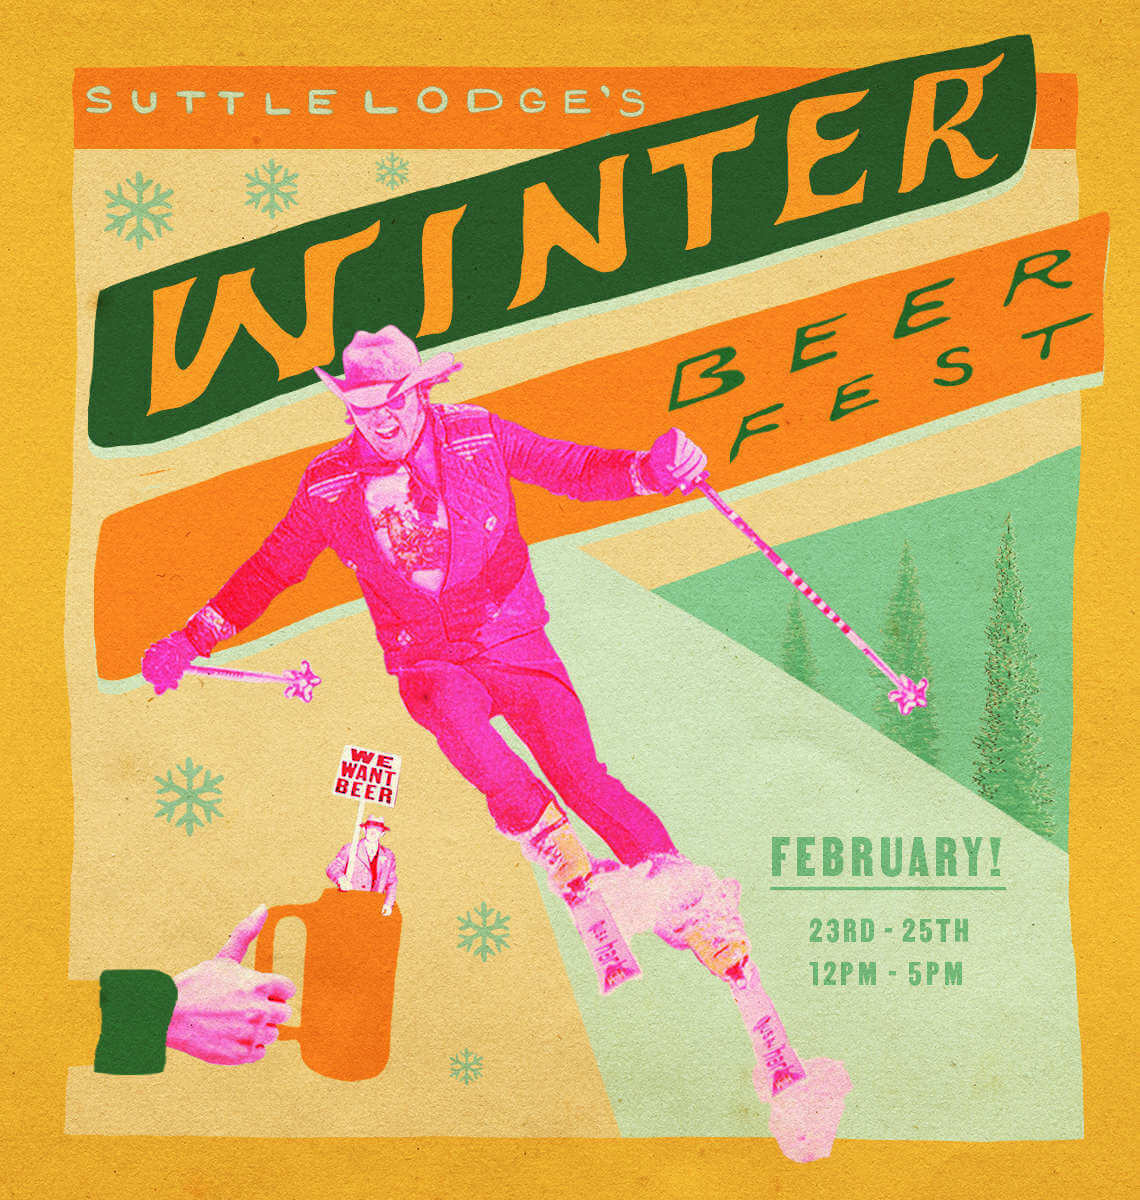 The 5th annual Suttle Lodge Winter Beer Festival takes place February 23-25